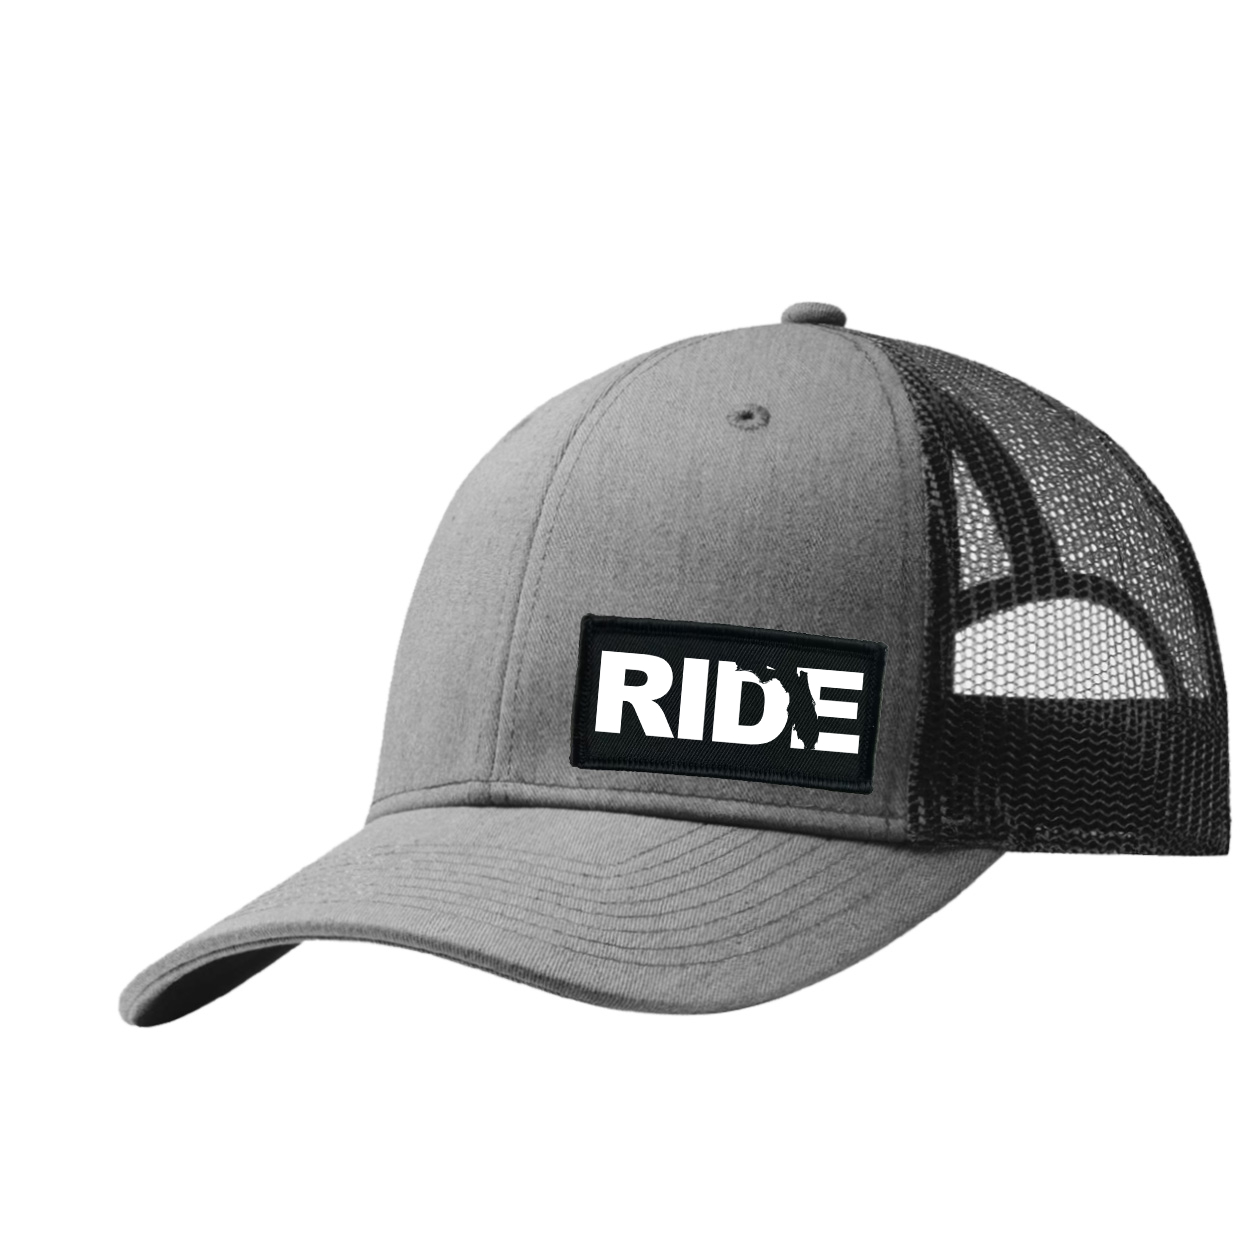 Ride Florida Night Out Woven Patch Snapback Trucker Hat Heather Gray/Black (White Logo)